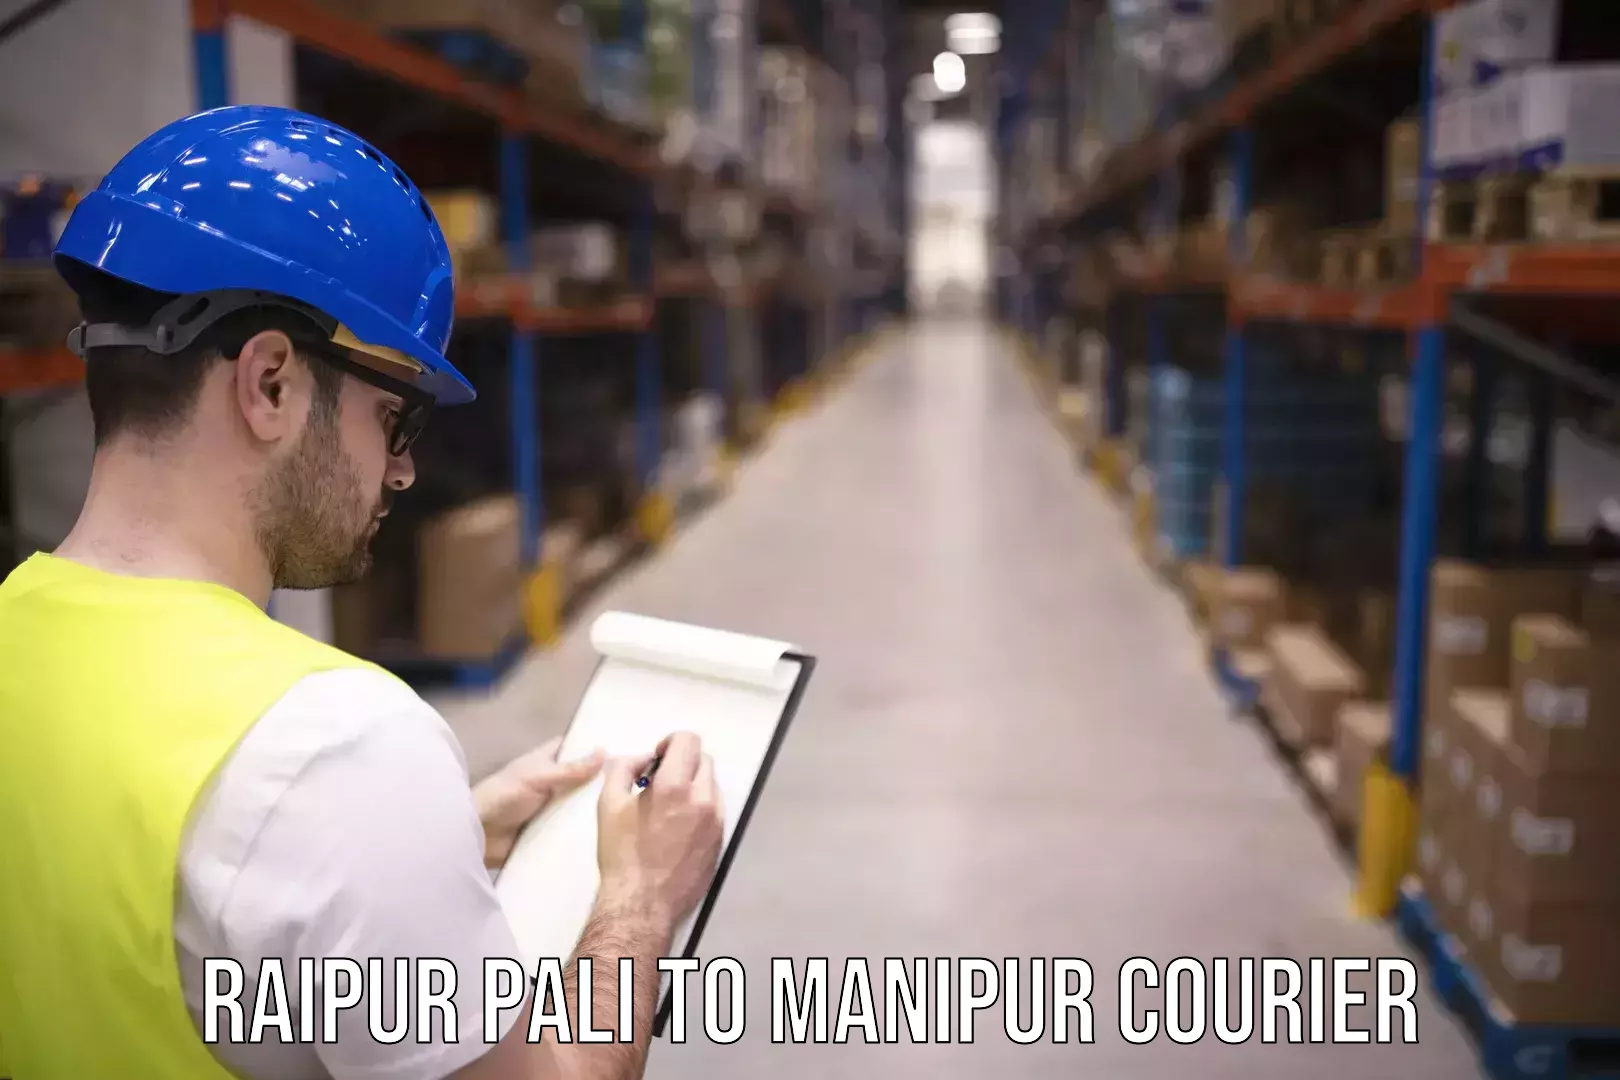 Courier service partnerships Raipur Pali to Imphal